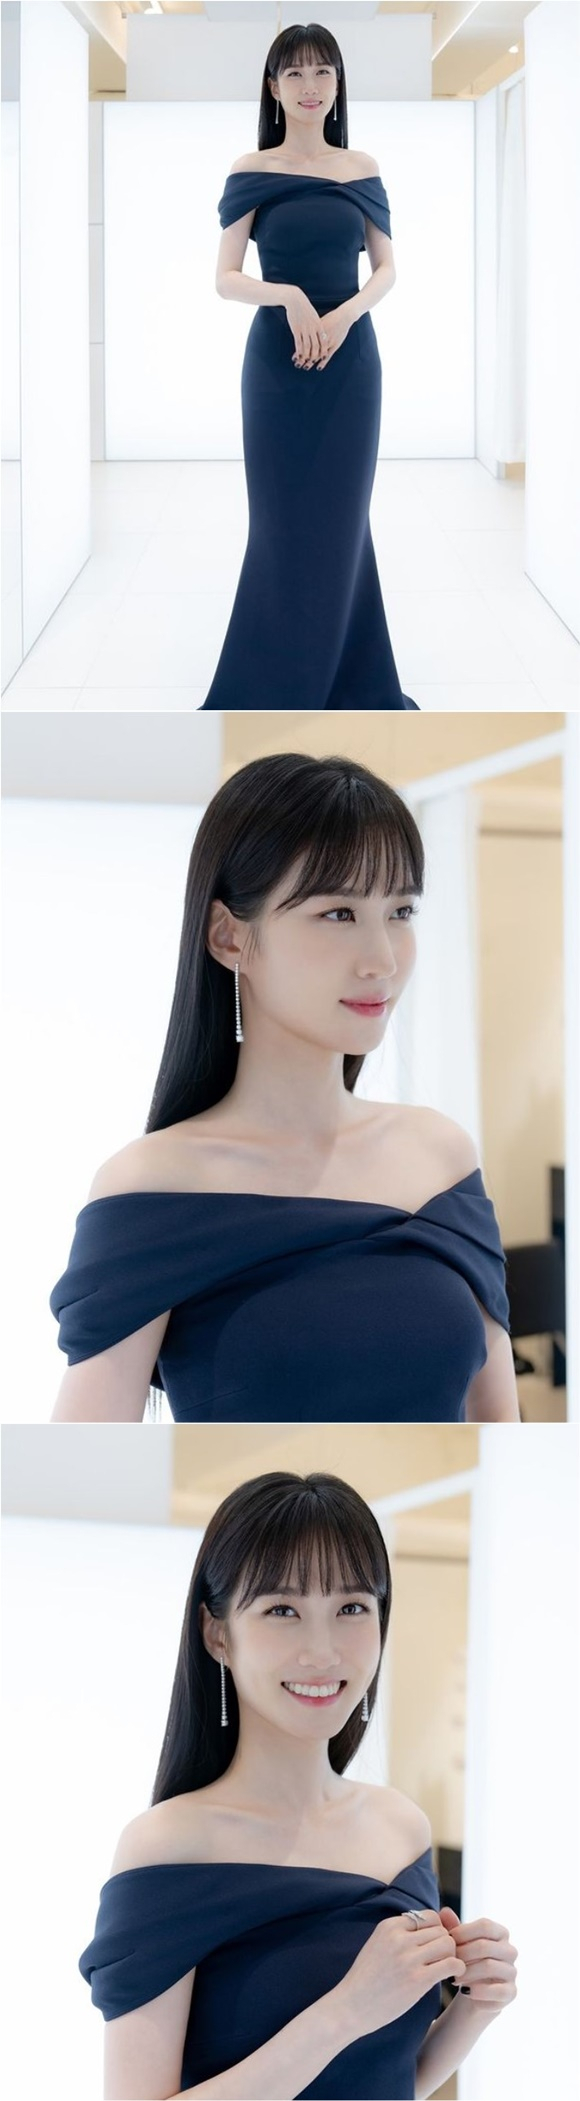 Park Eun-bins agency Tree Ectus said on the official Instagram on March 3, I am getting a heart whisper to a beautiful actor.I posted a few photos with the article I am going to join the actor.Inside the photo is a picture of Park Eun-bin, who is leaving a certification shot in the waiting room of the 42nd Blue Dragon Film Awards.The elegant, innocent look of Park Eun-bin in a navy dress that revealed her shoulders draws attention.The netizens who watched the photos responded such as I can not get away from it already, It is so beautiful, The Kings Effection and It is beautiful enough to be called a princess.Above all, Park Eun-bin attracted the attention of viewers as she showed off her beautiful beauty in an elegant dress that revealed her slender shoulders.Meanwhile, Park Eun-bin is appearing on KBS 2TV Mon-Tue drama The Kings Action.